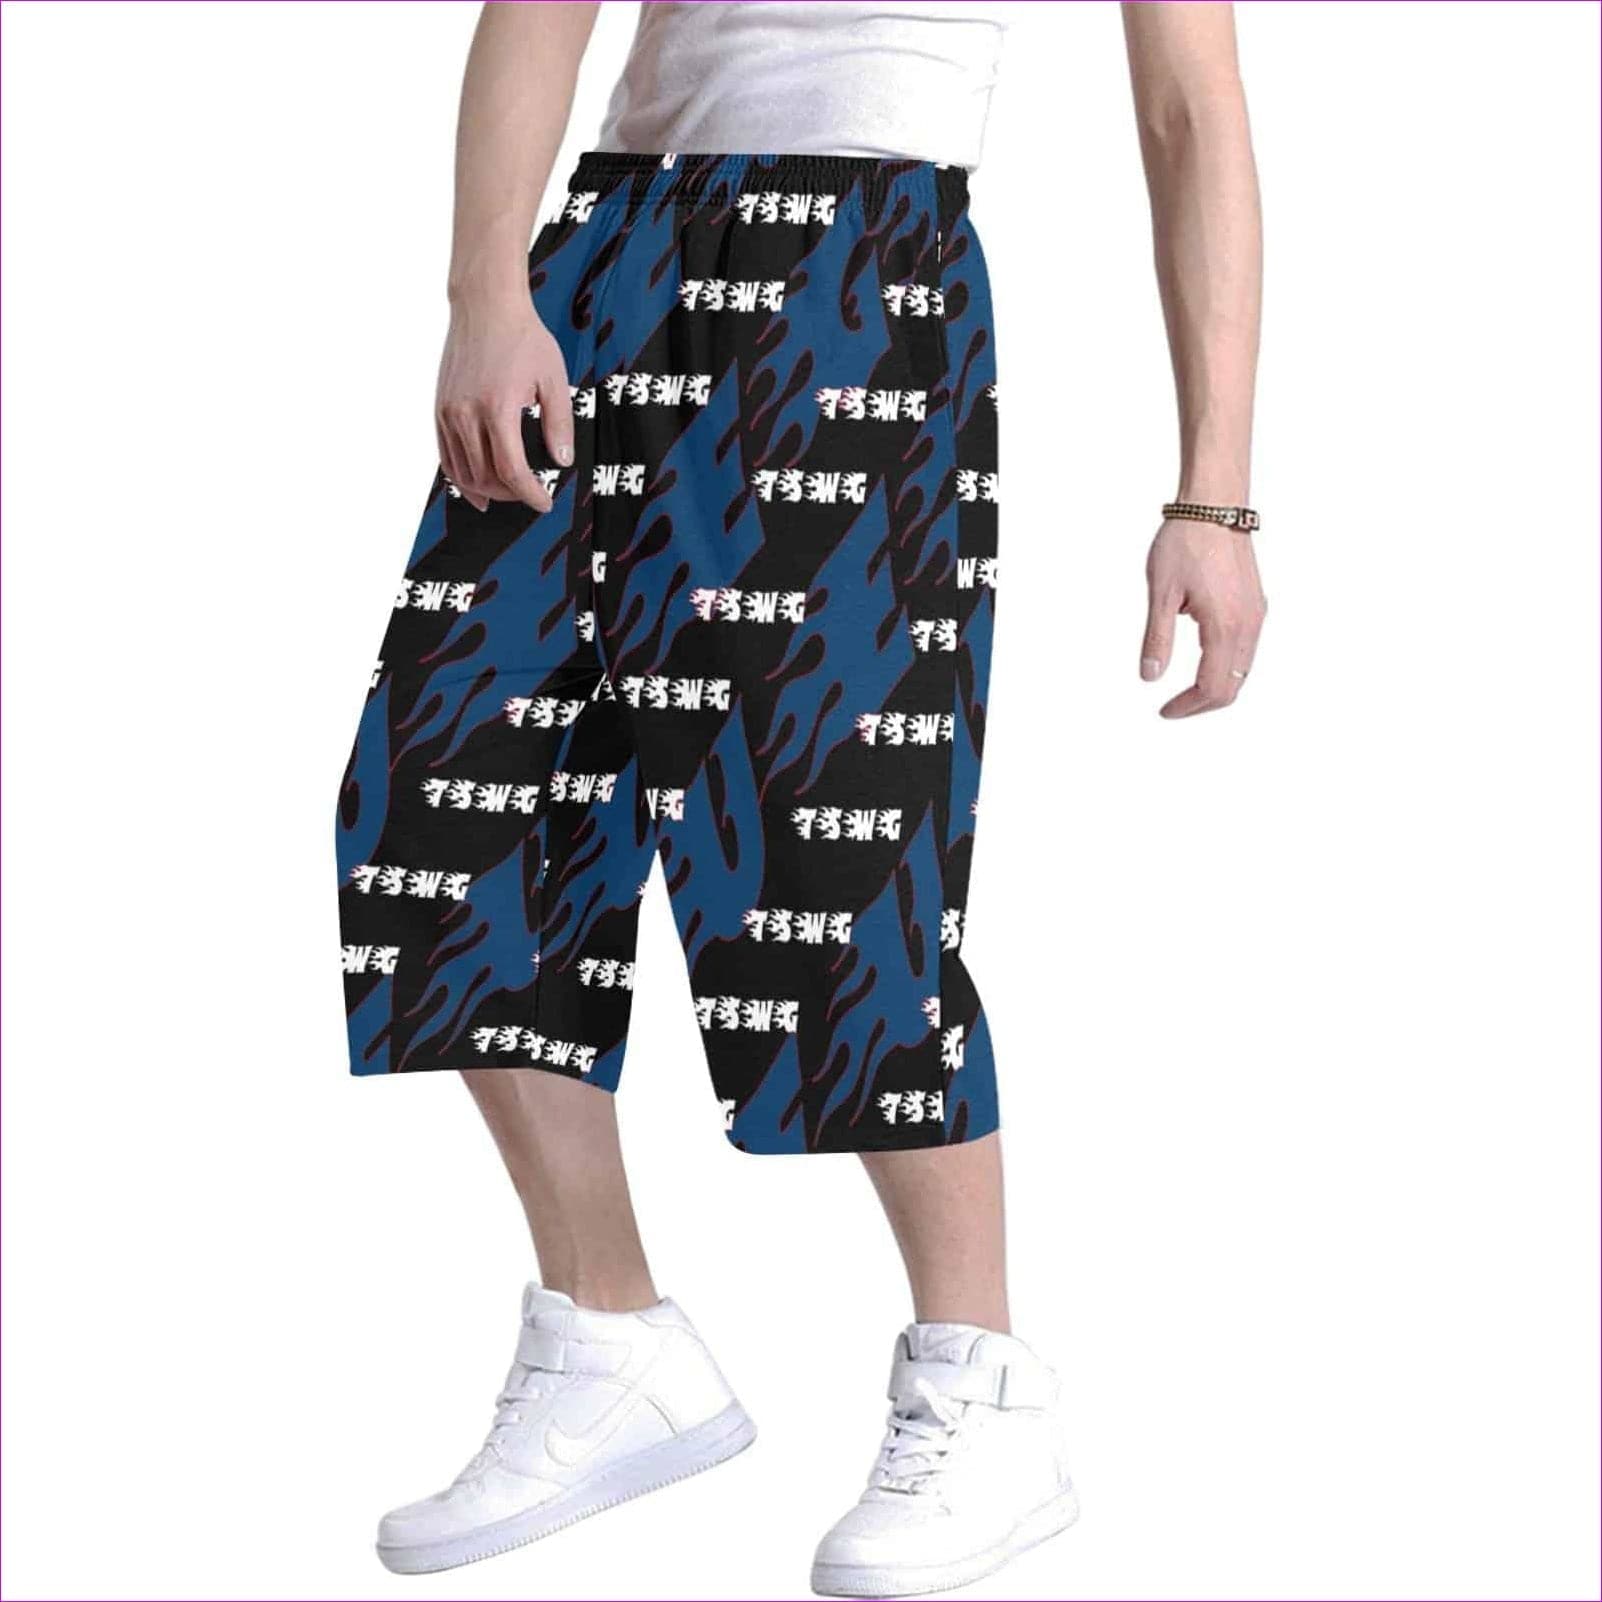 TSWG Fuego Flame Blue 2 Men's All Over Print Baggy Shorts (Model L37) - TSWG Fuego Flame Baggy Shorts for Men - 2 styles - mens shorts at TFC&H Co.